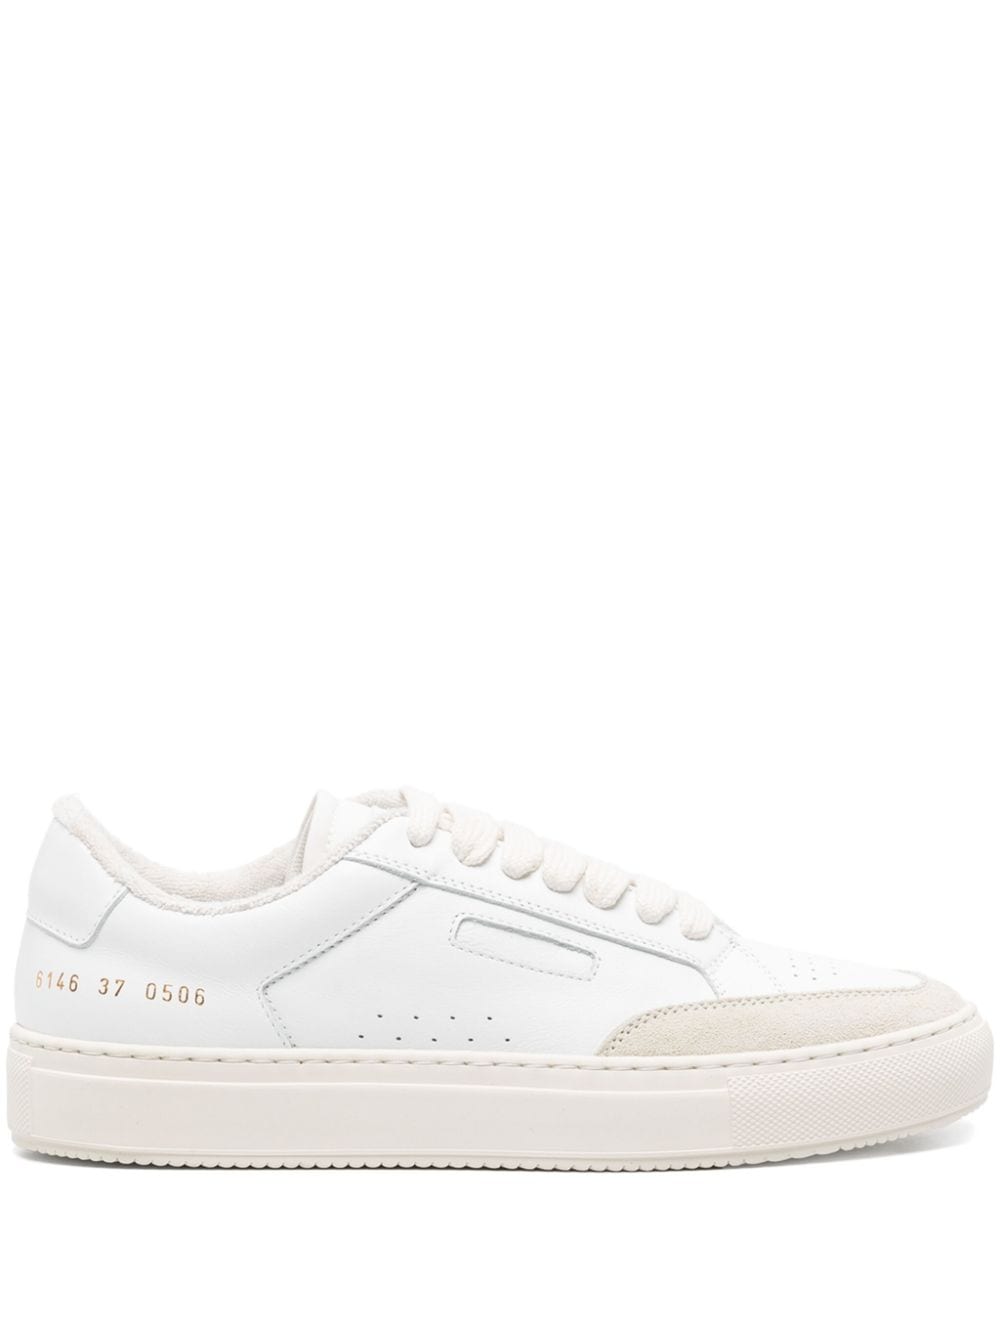 Common Projects stamped-numbers leather sneakers - White von Common Projects